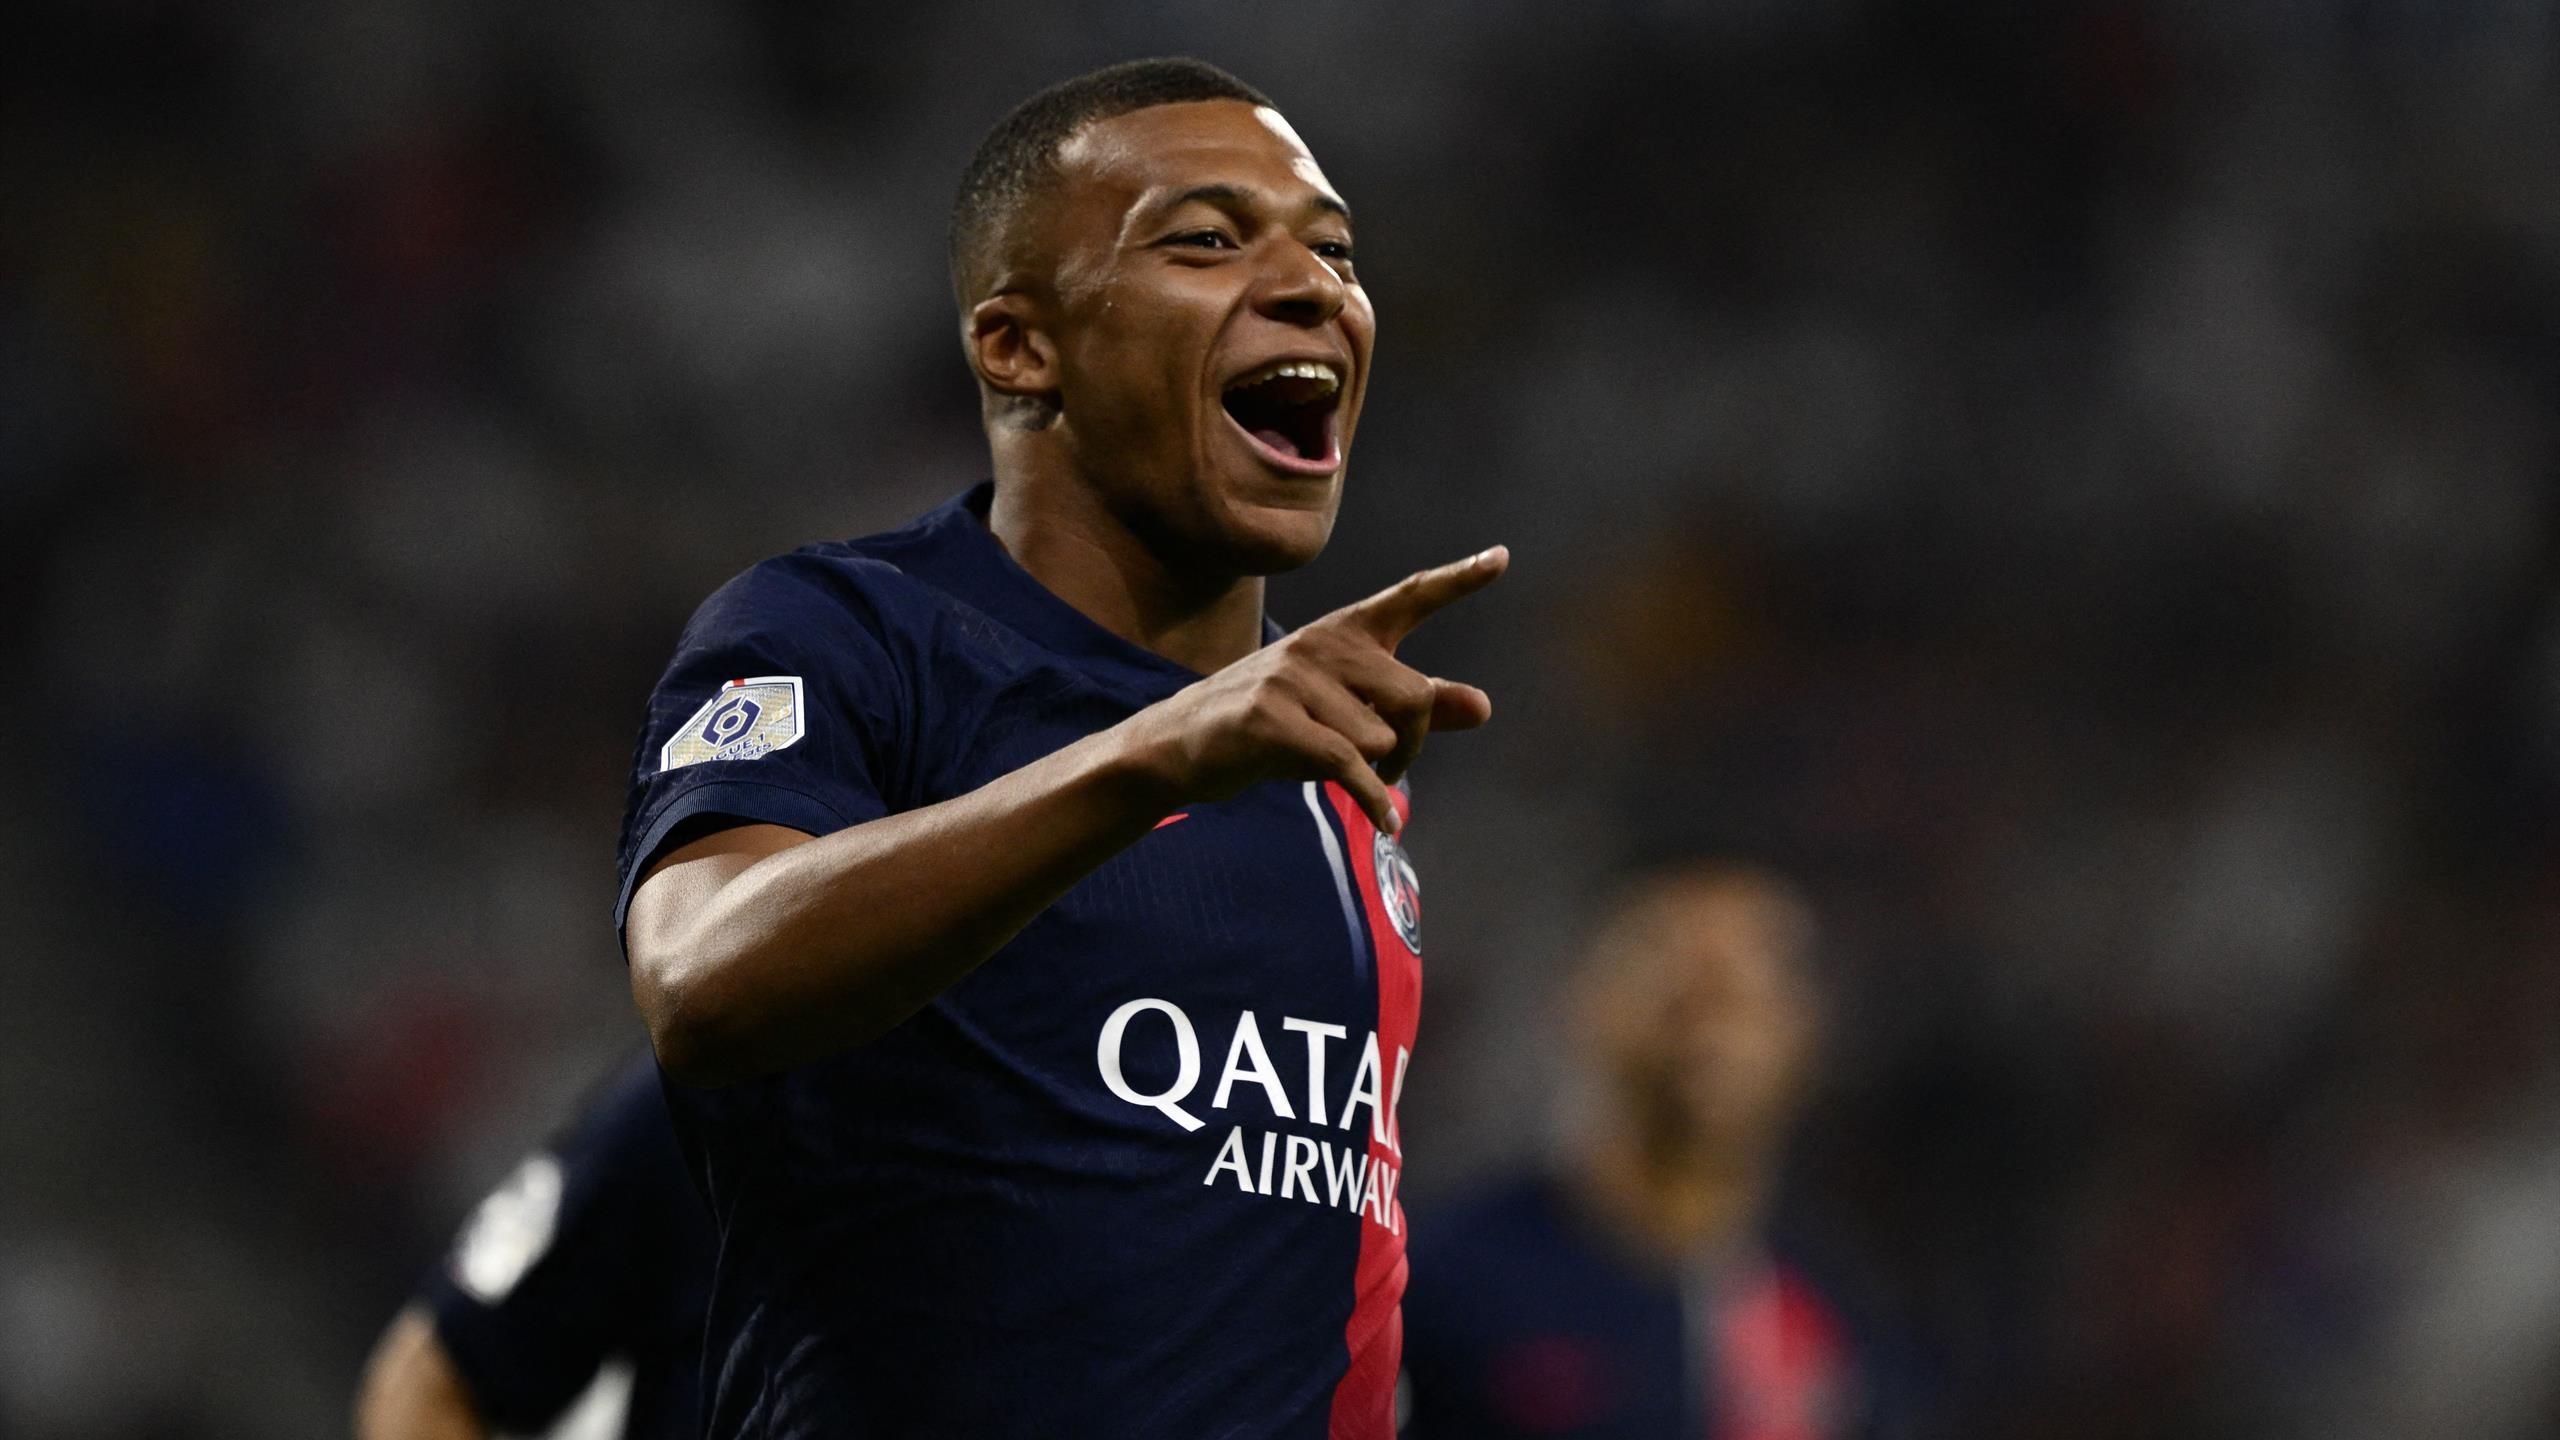 Kylian Mbappe bags brace as PSG ease to Ligue 1 victory at lowly Lyon